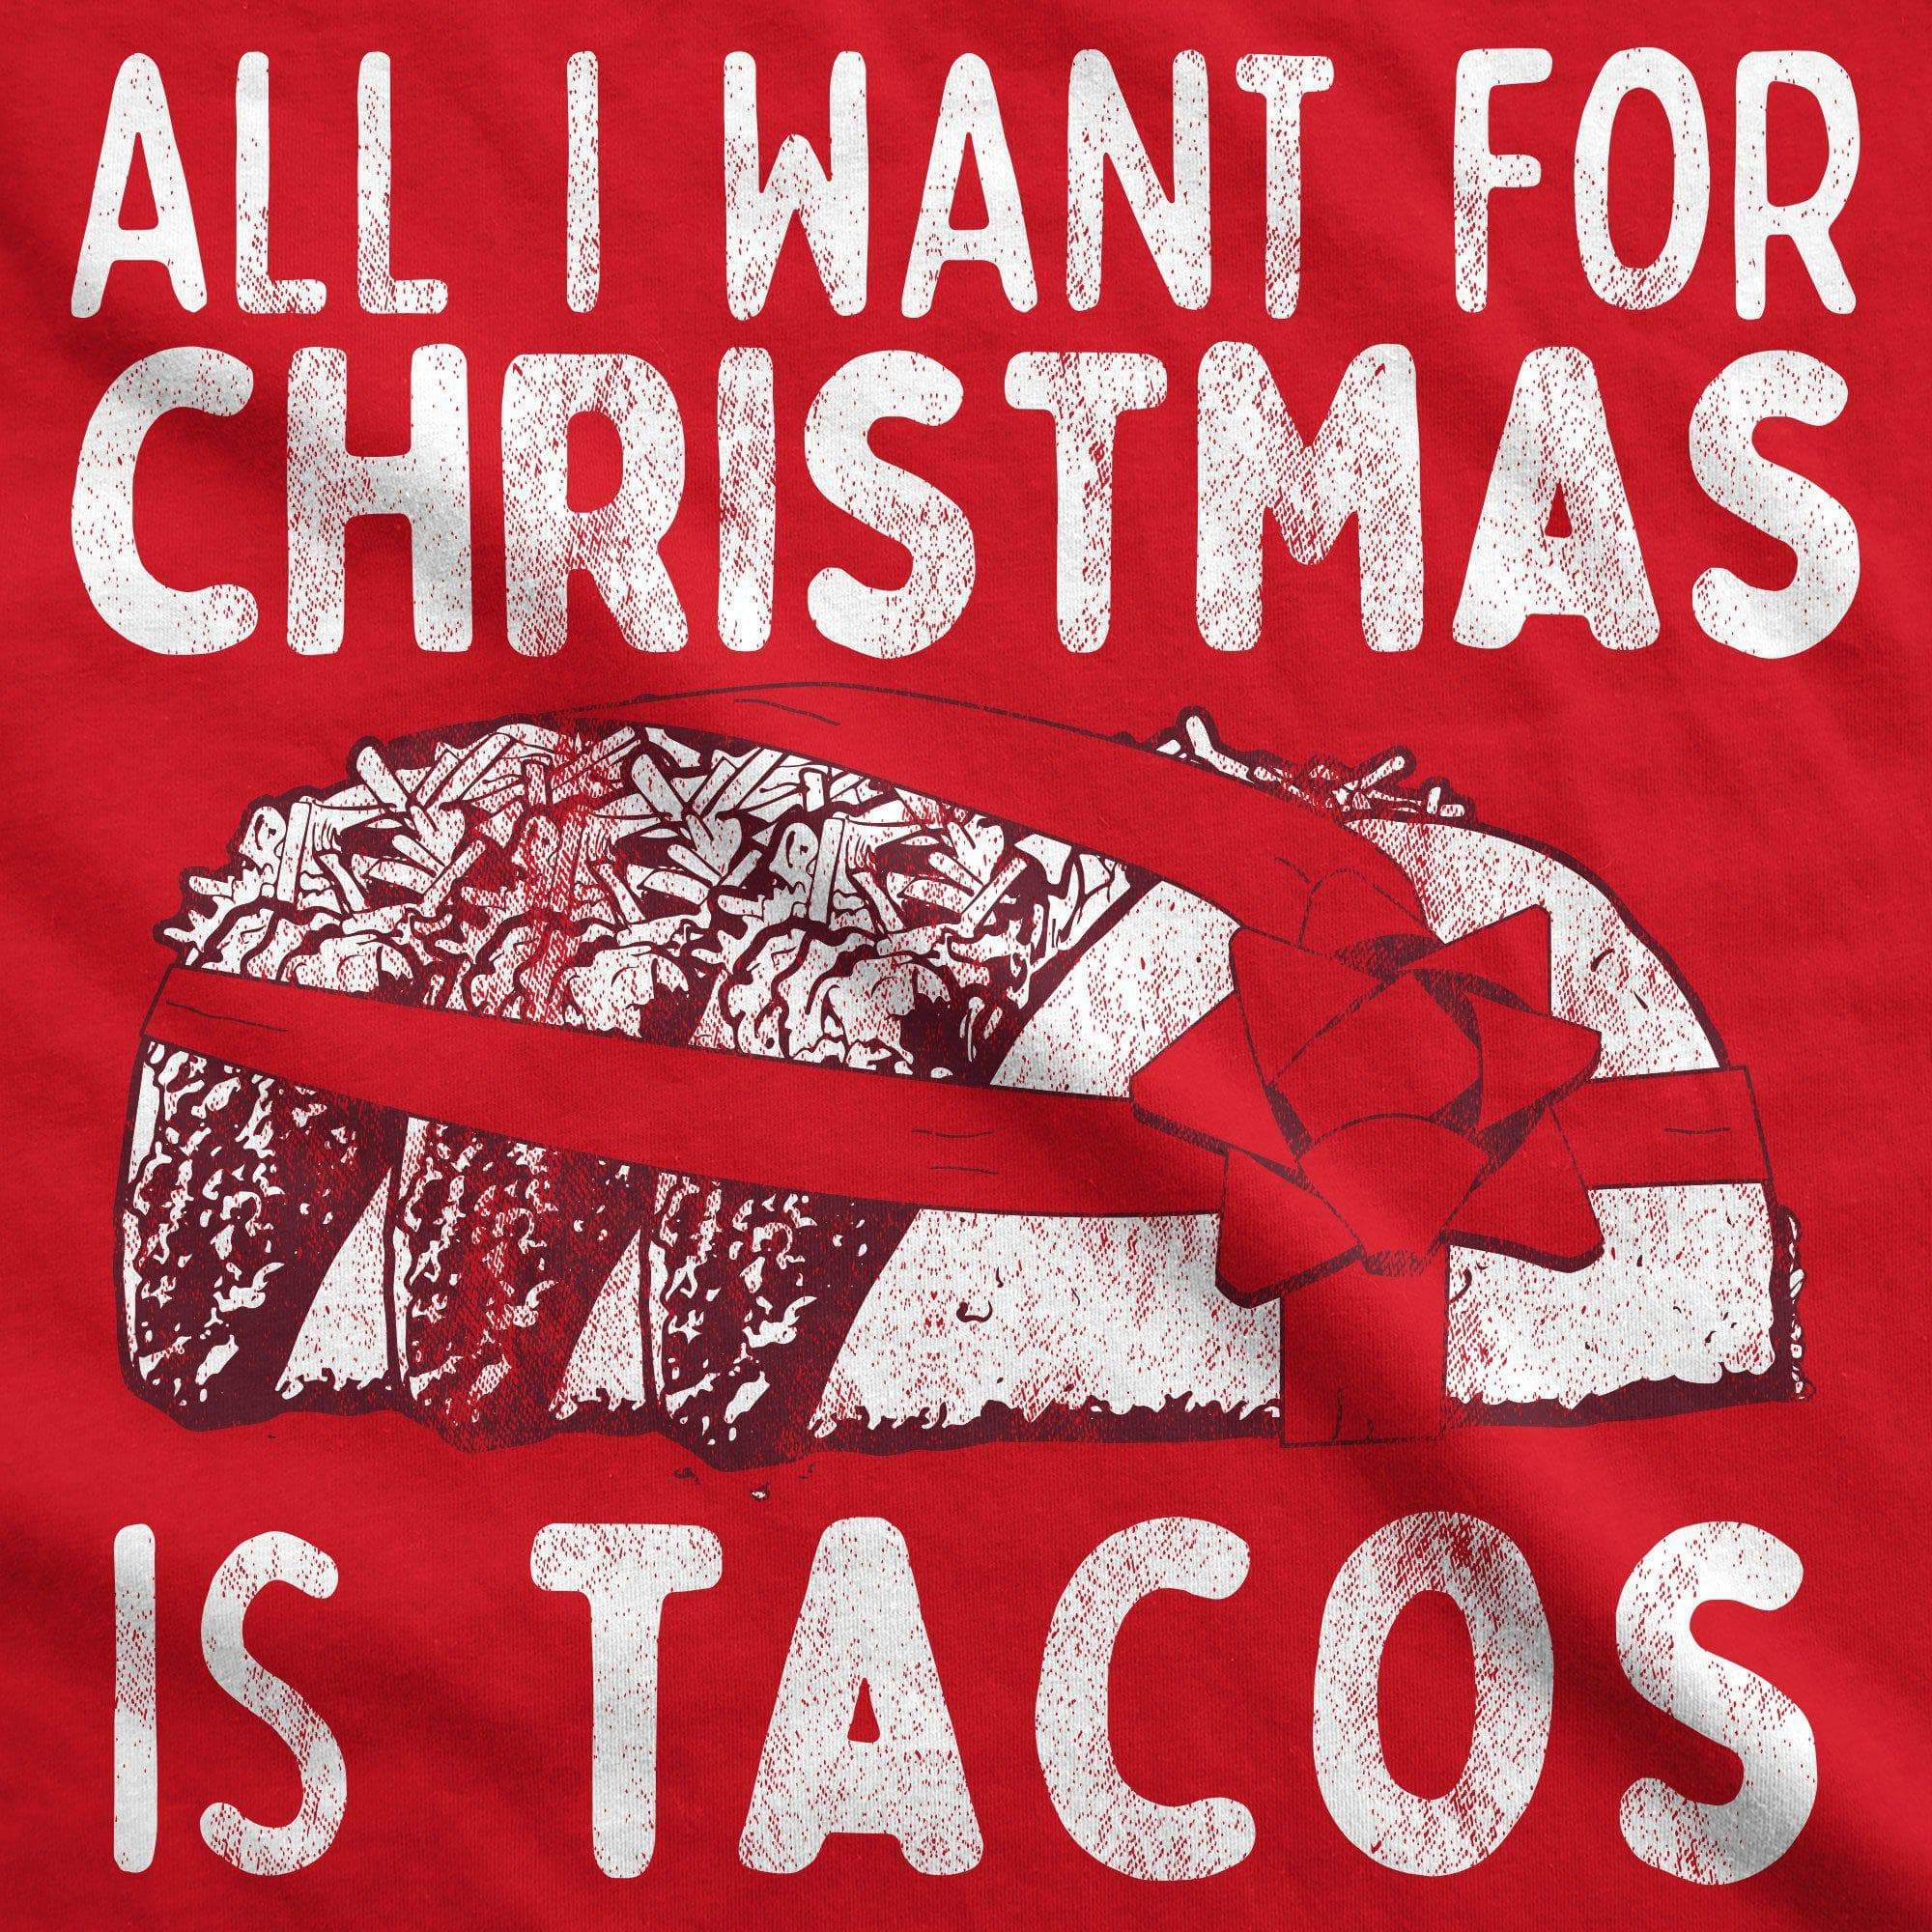 All I Want For Christmas Is Tacos Women's Tshirt - Crazy Dog T-Shirts